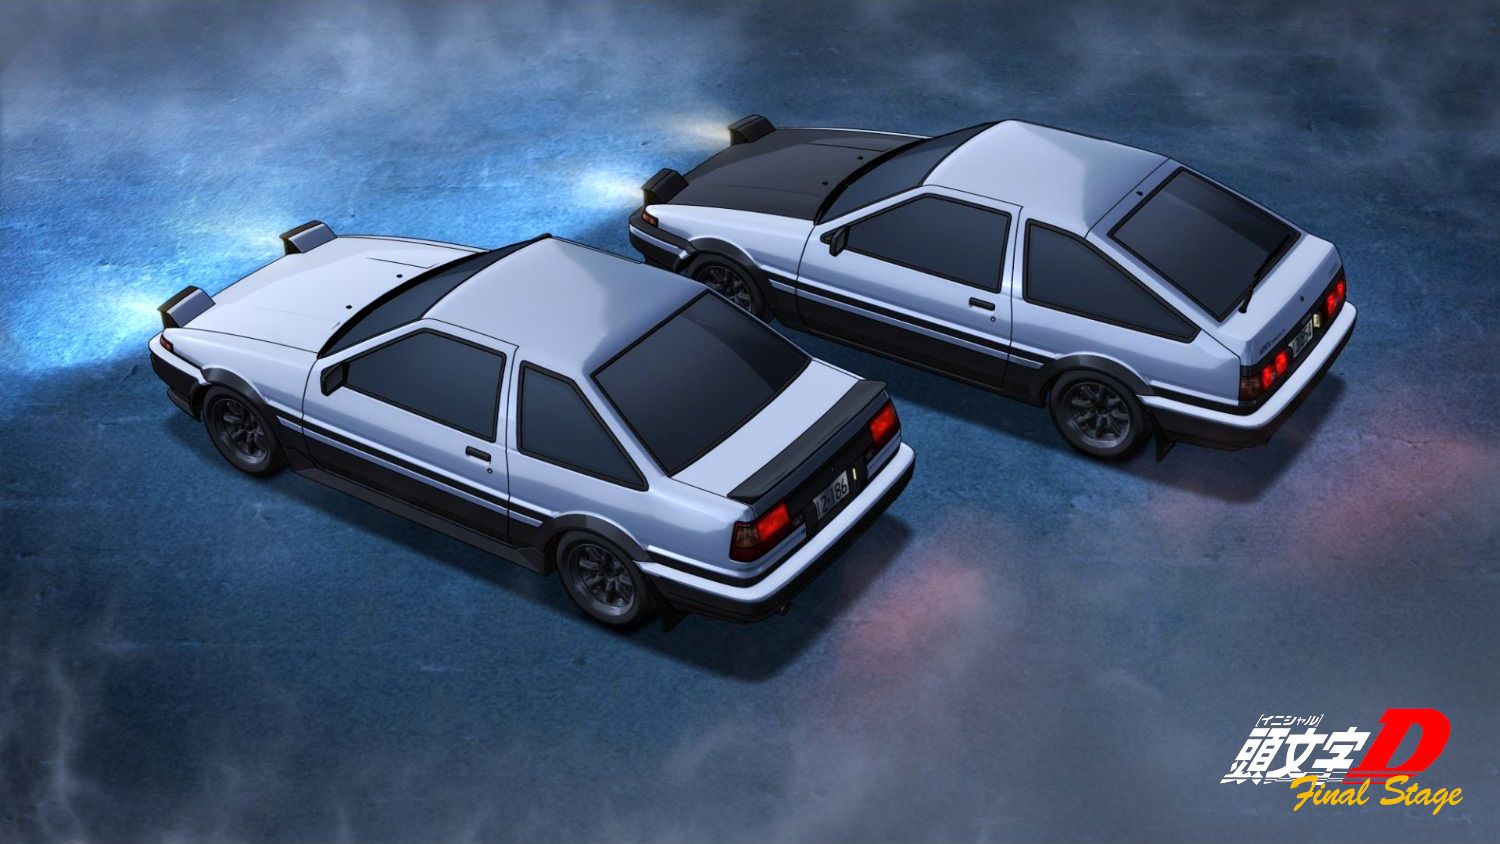 Initial D Fifth Stage Wallpaper on .hipwallpaper.com